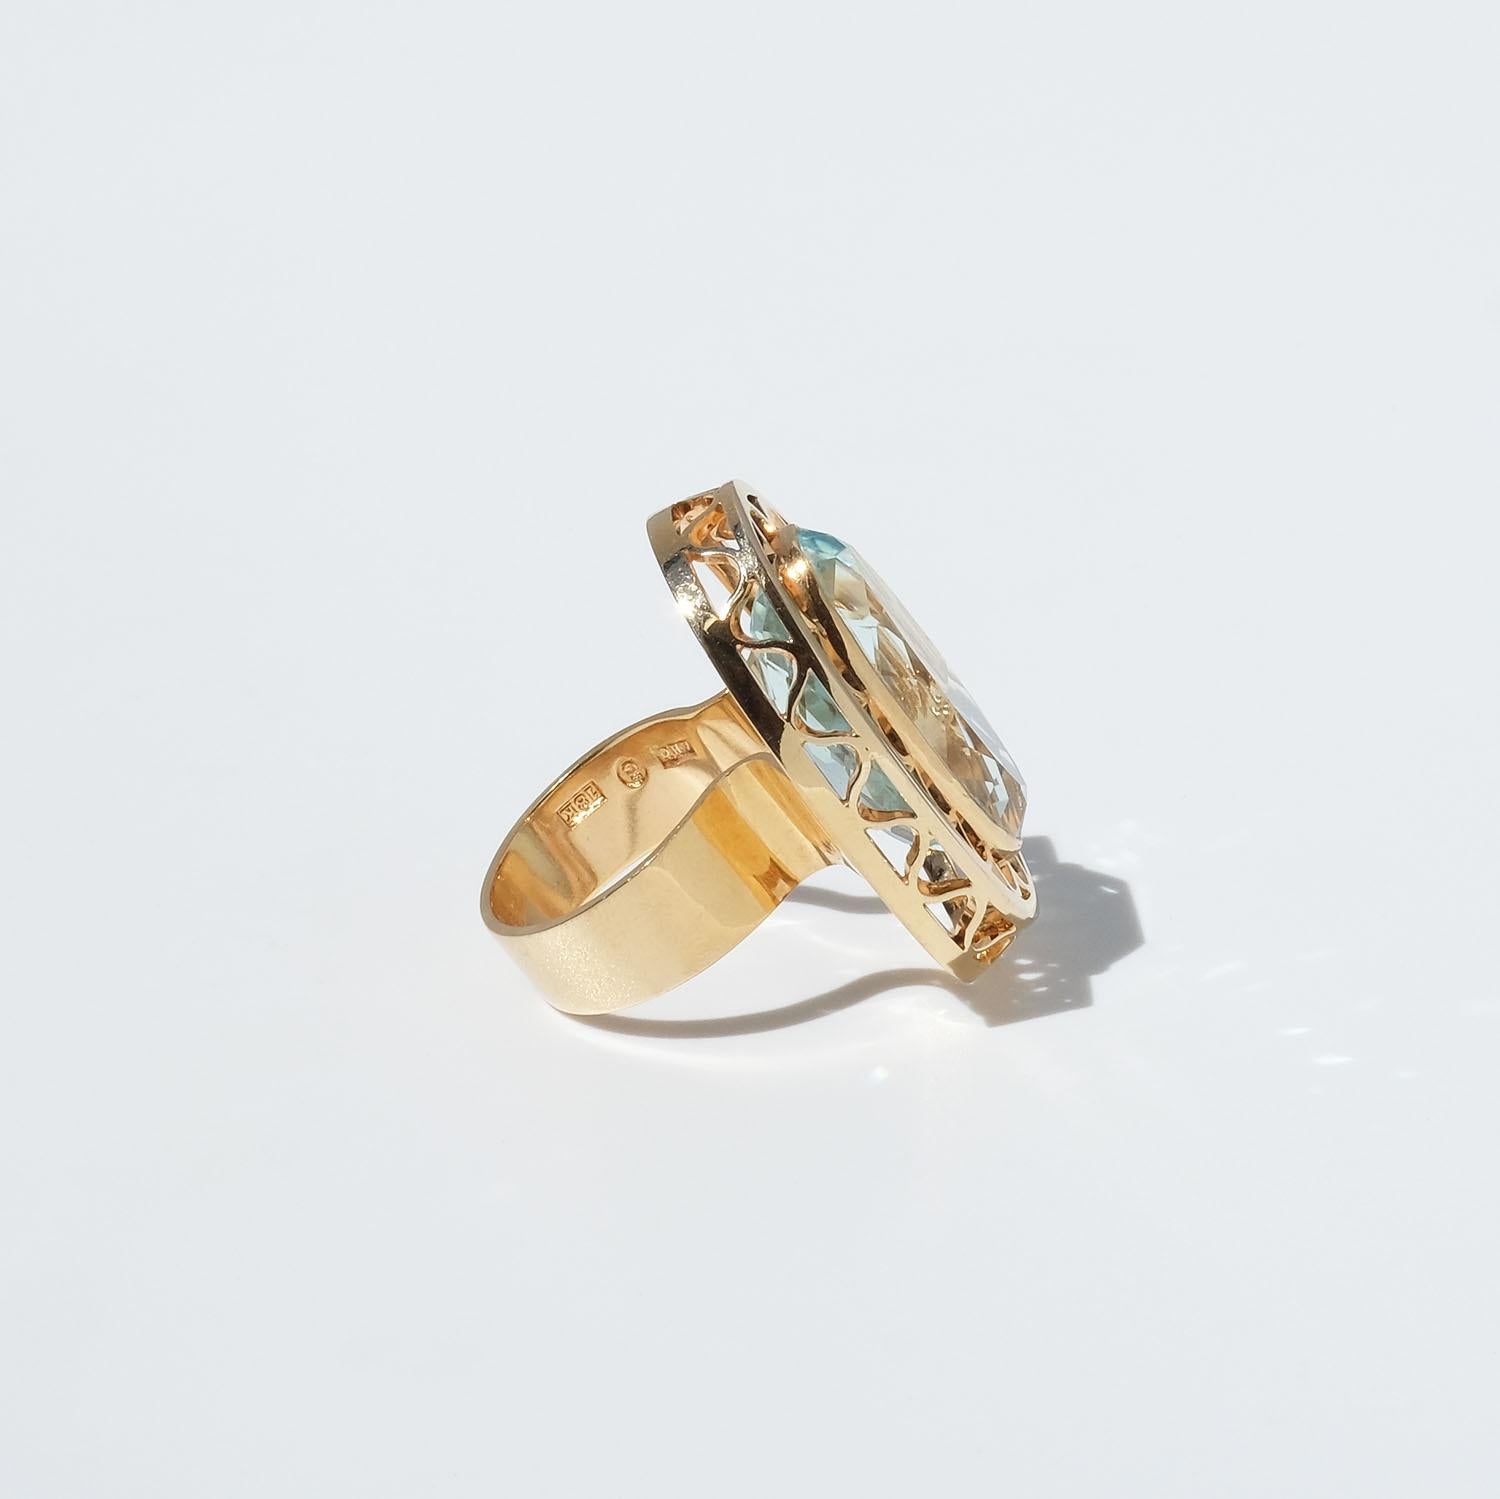 Vintage 18k Gold and Aquamarine Ring by Master Anders Högberg Year, 1977 In Good Condition For Sale In Stockholm, SE